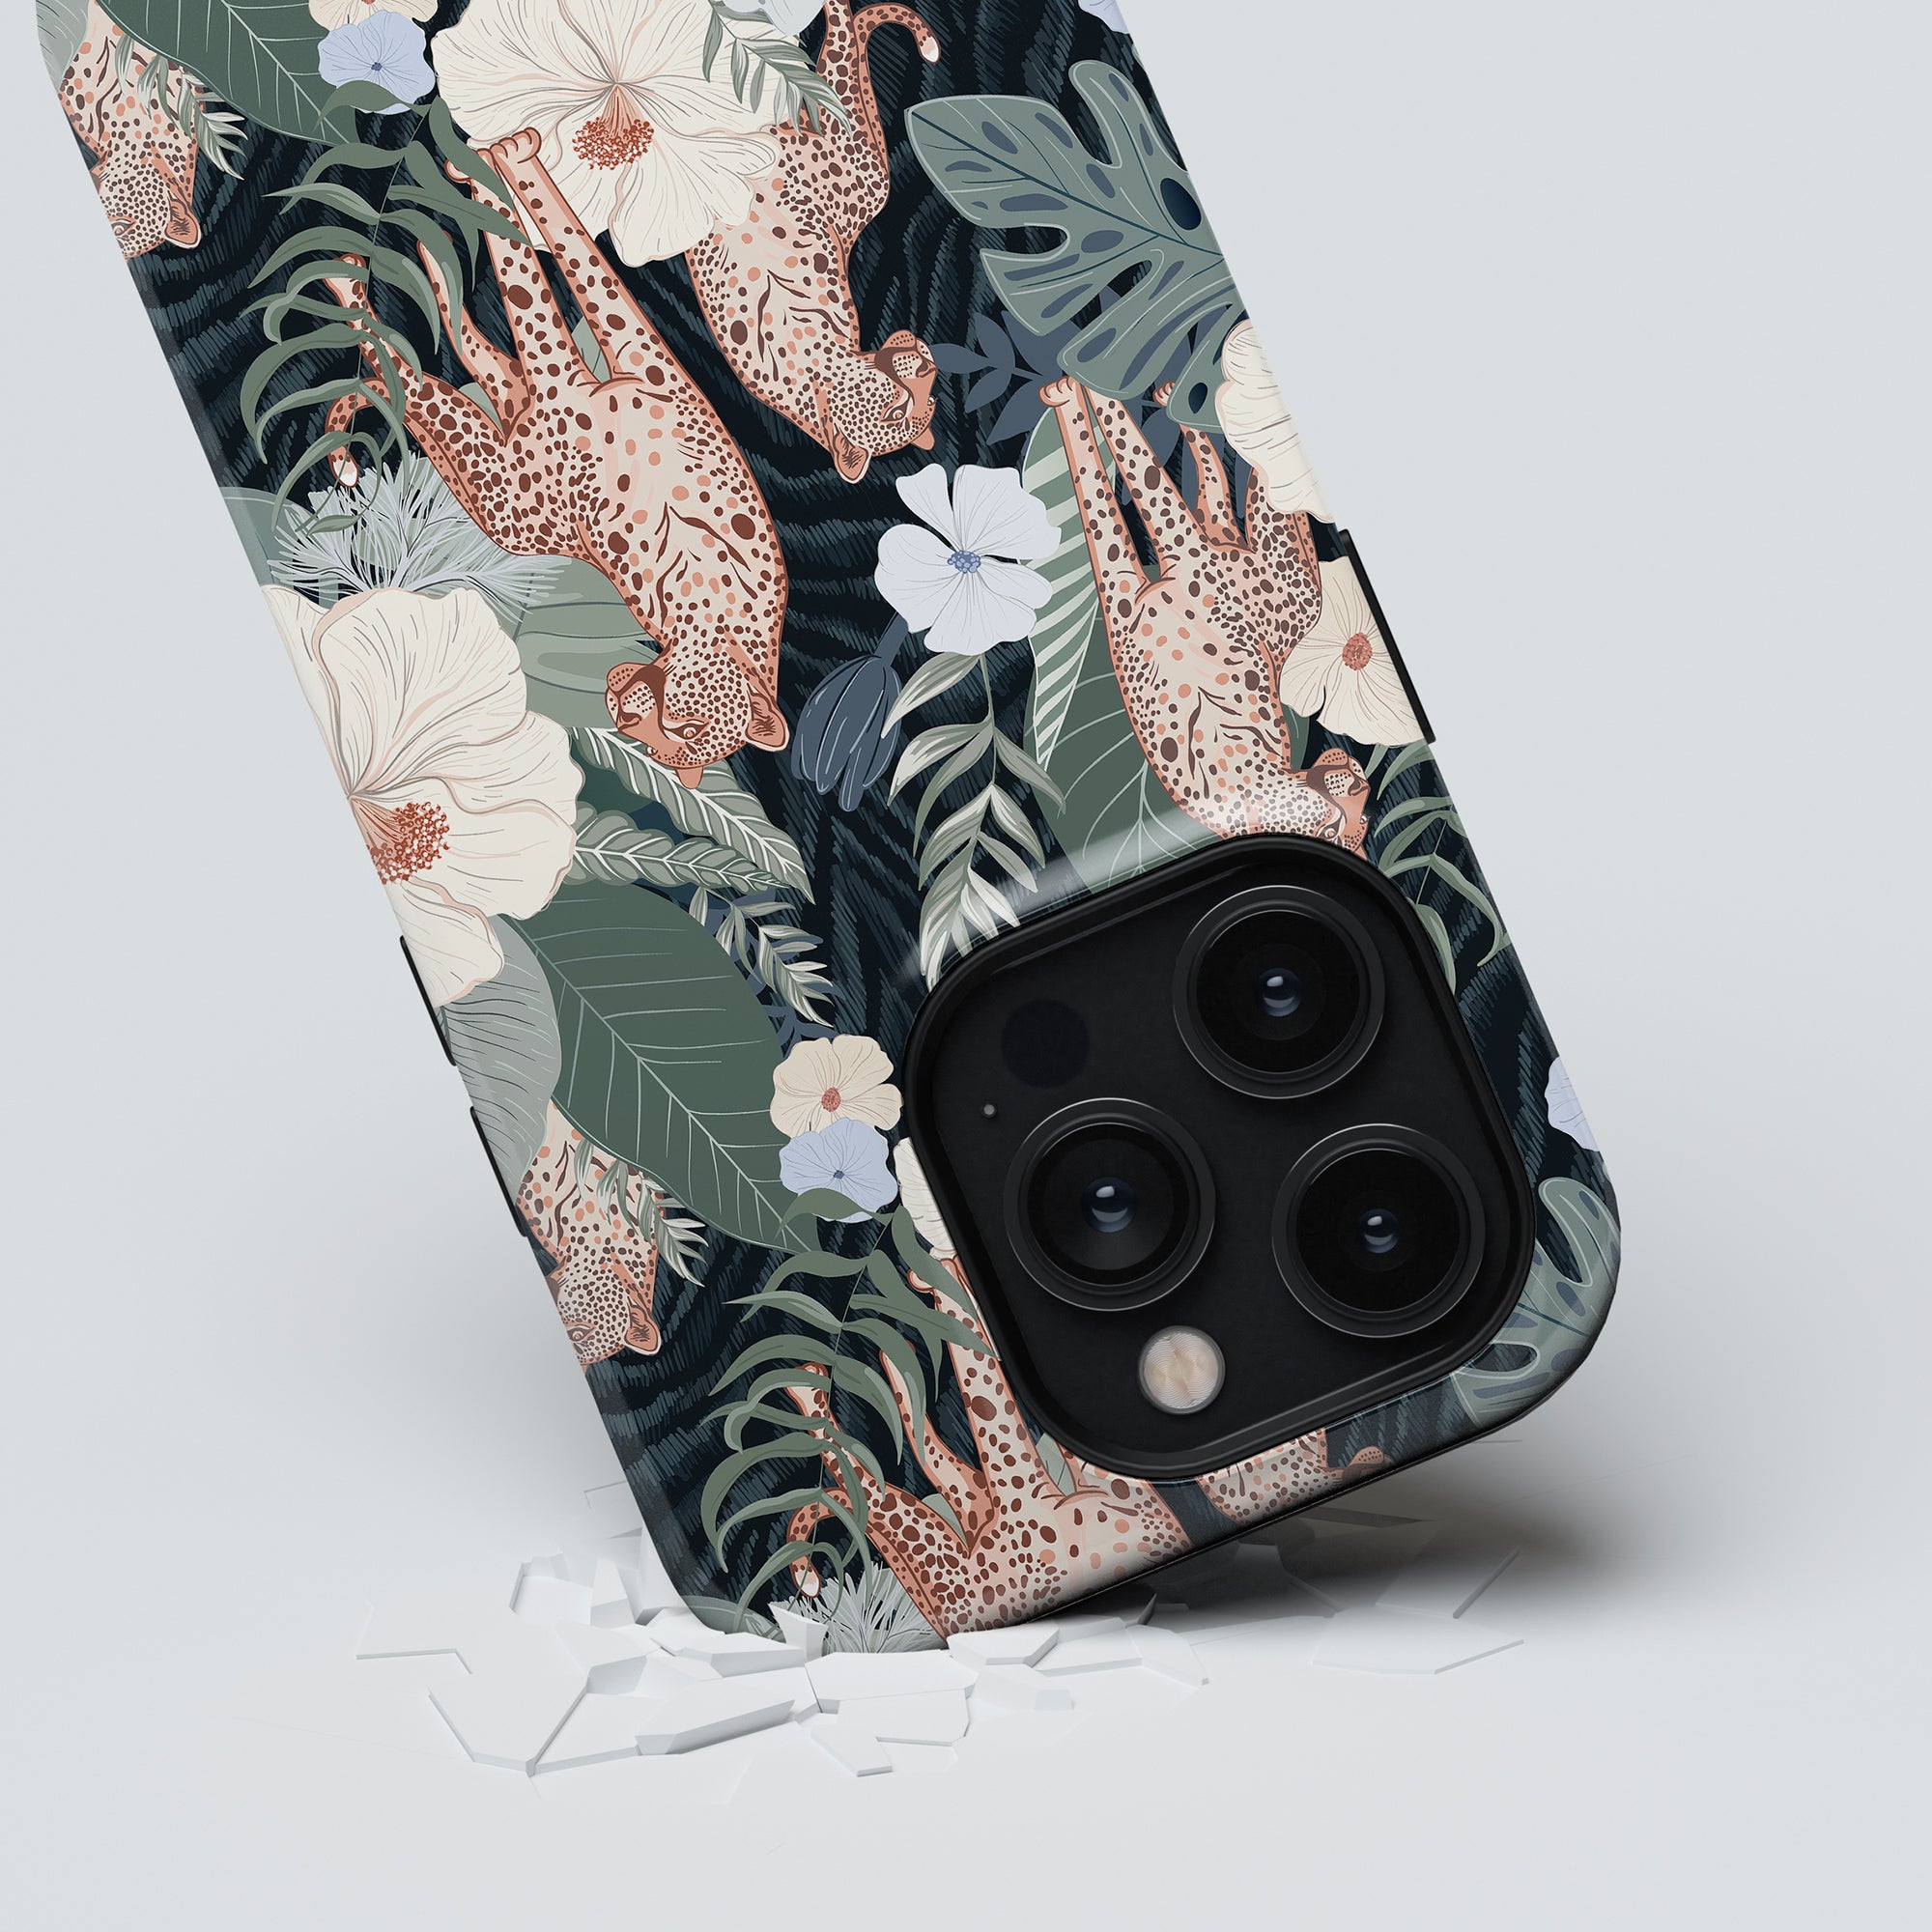 A smartphone with a Leopardess - Tough Case lying face down, its camera lenses visible against a broken glass background.